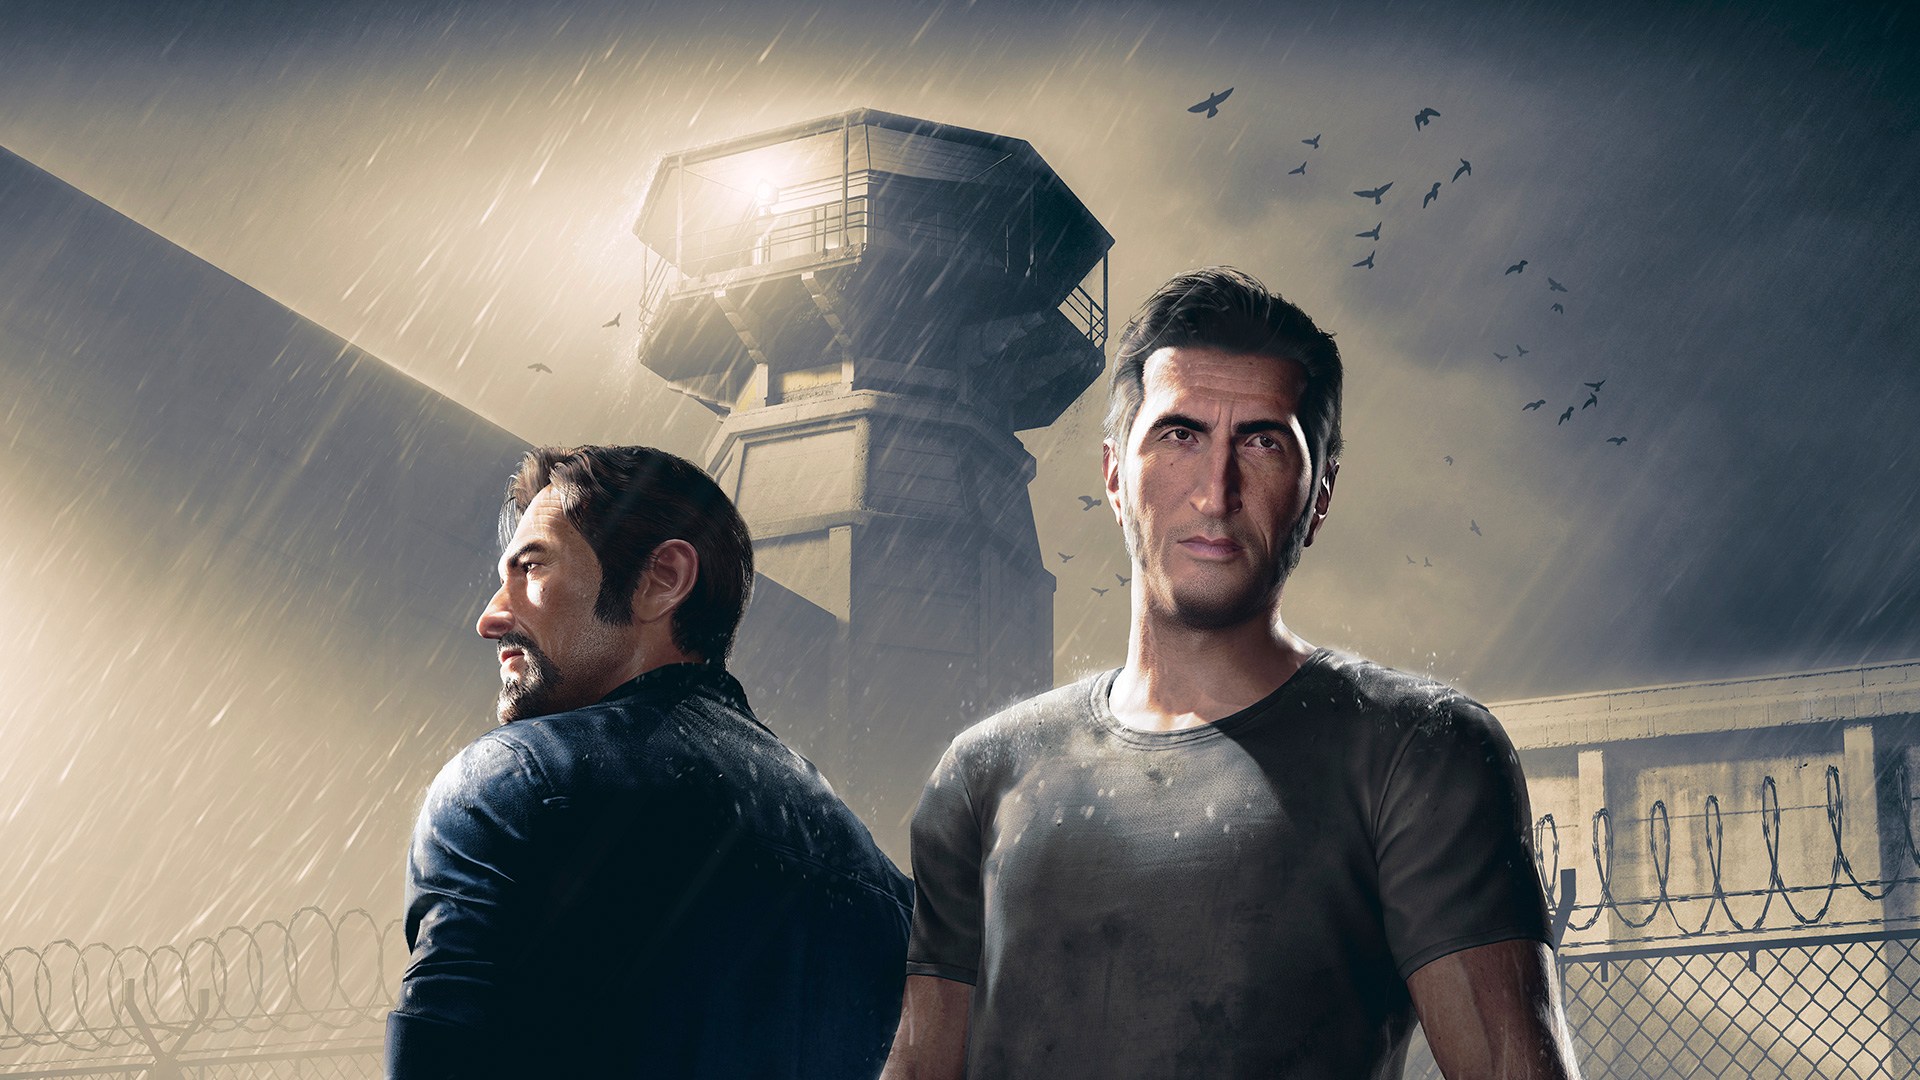 Дай аут. A way out ps4. Игра для PLAYSTATION 4 A way out. A way out (2018). Игра побег из тюрьмы a way out.